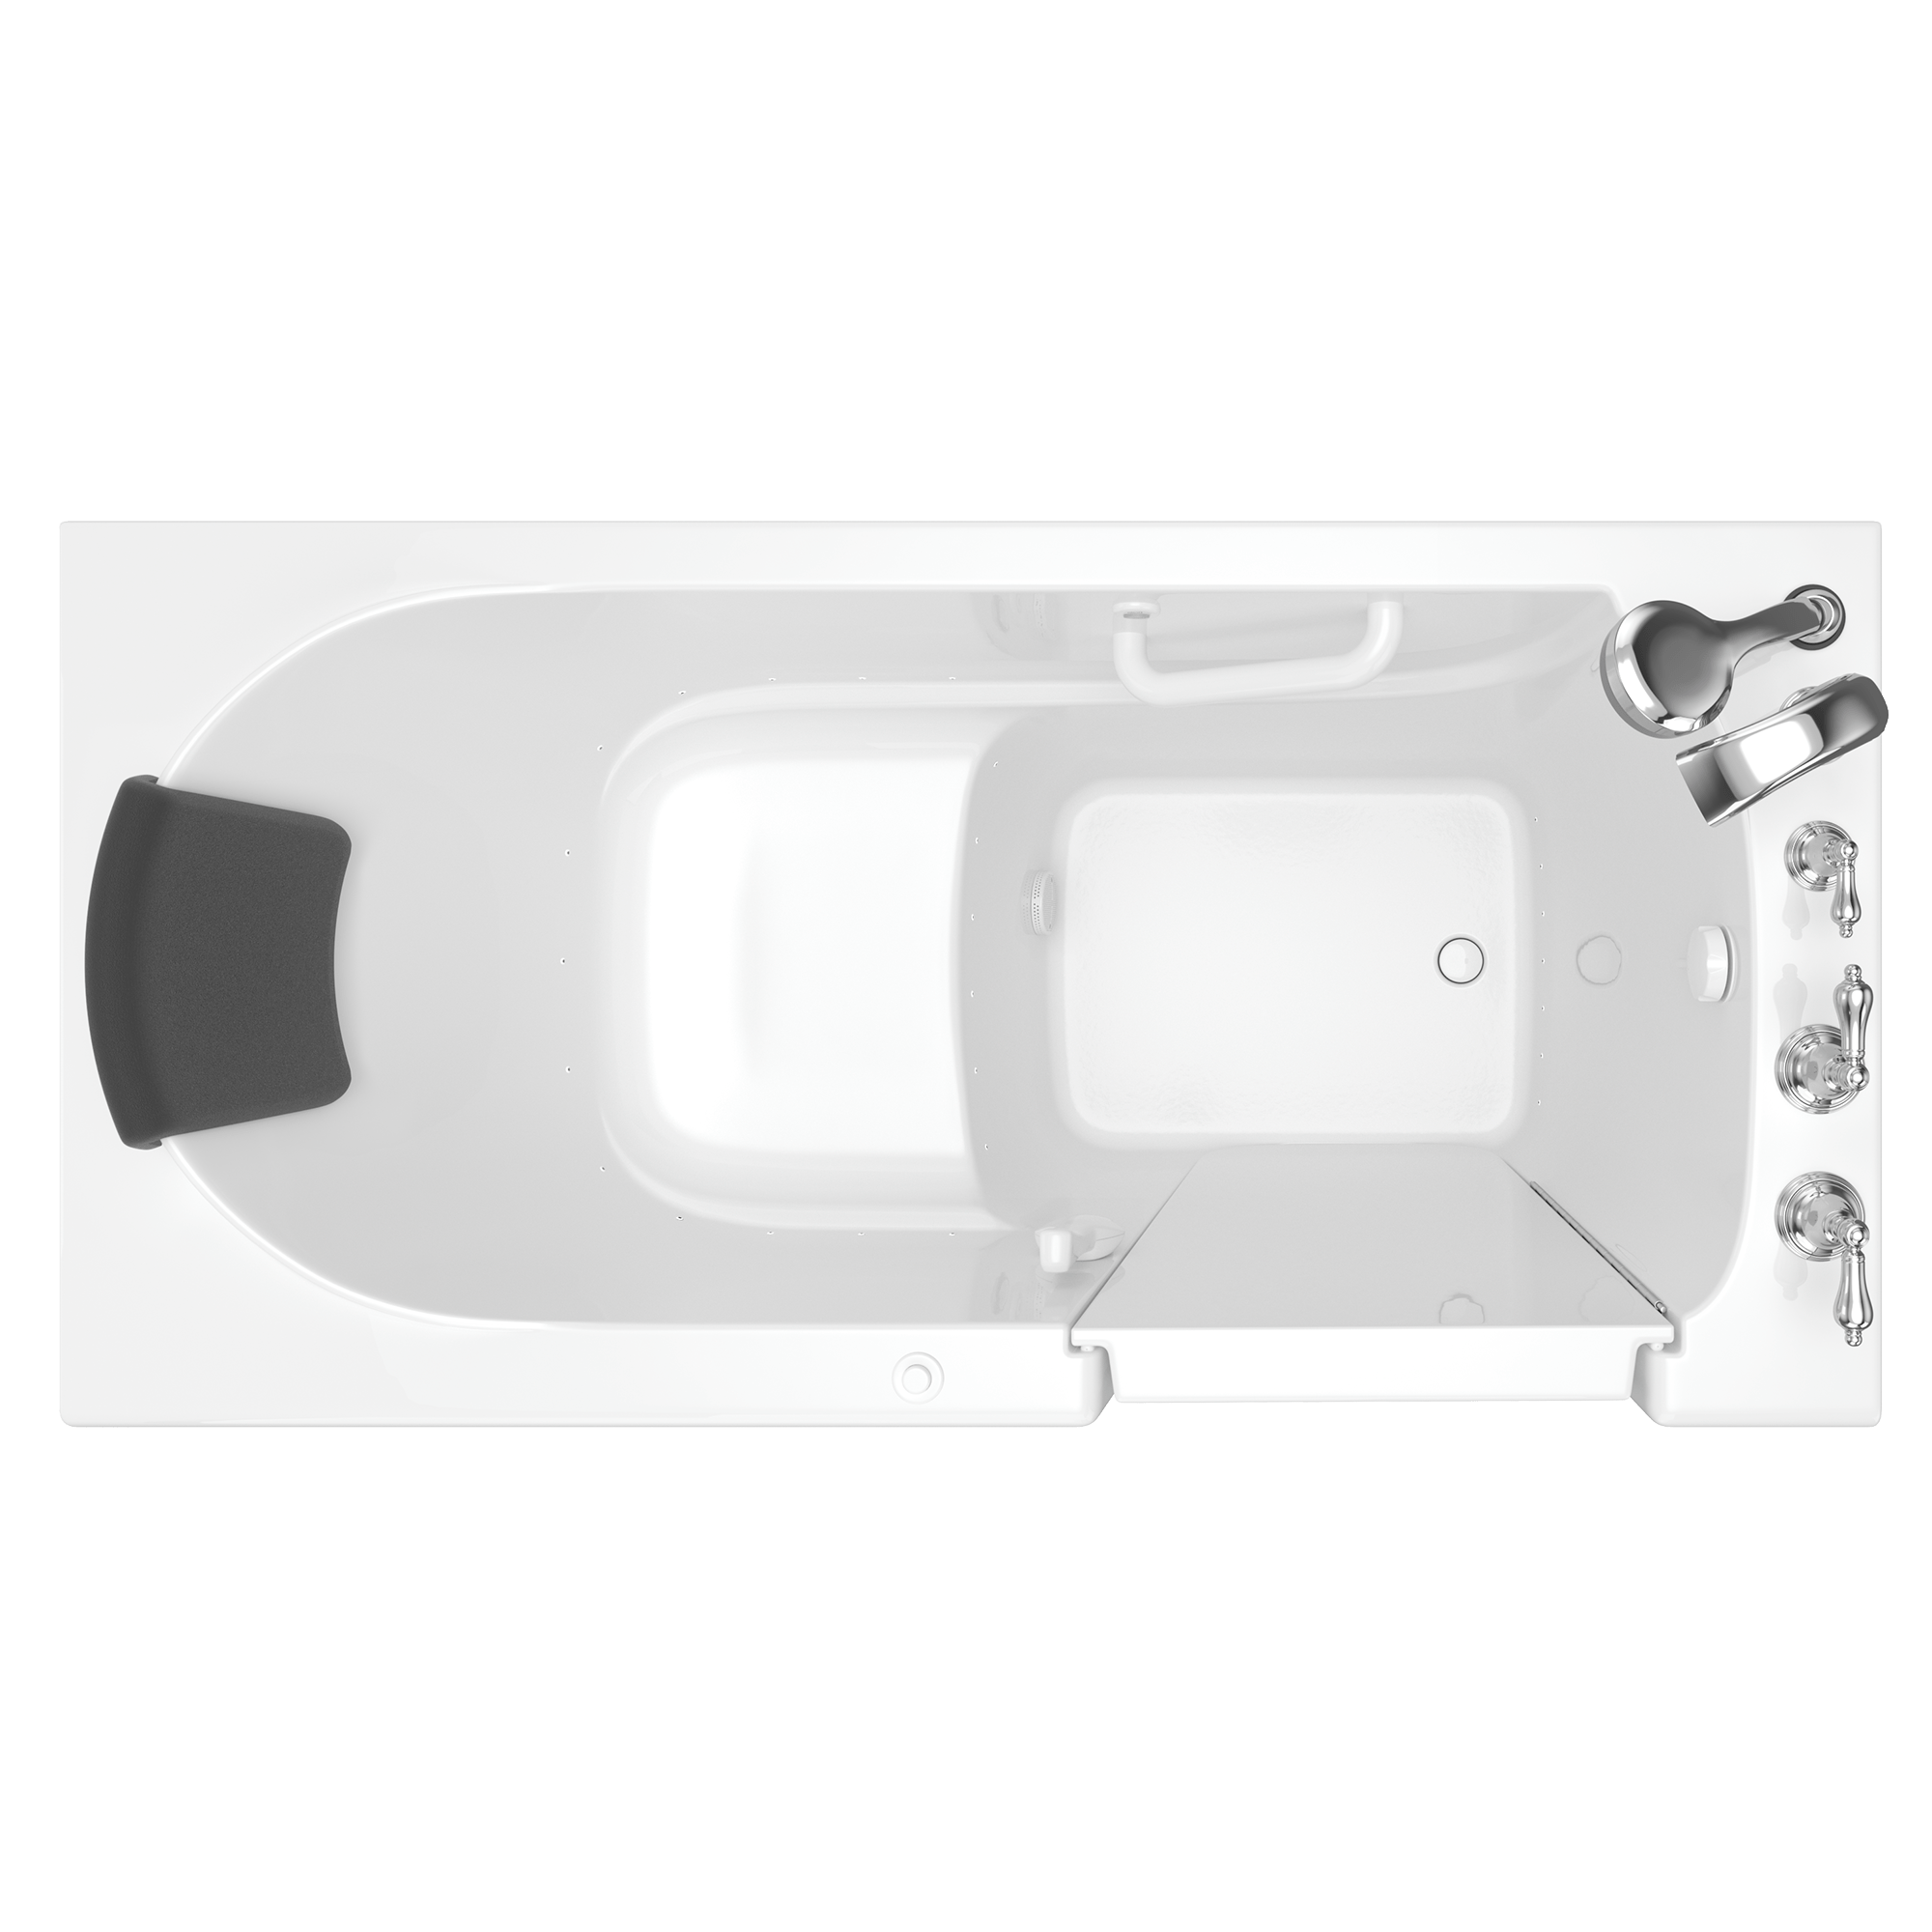 Gelcoat Premium Series 30 x 60  Inch Walk in Tub With Air Spa System   Right Hand Drain With Faucet WIB WHITE